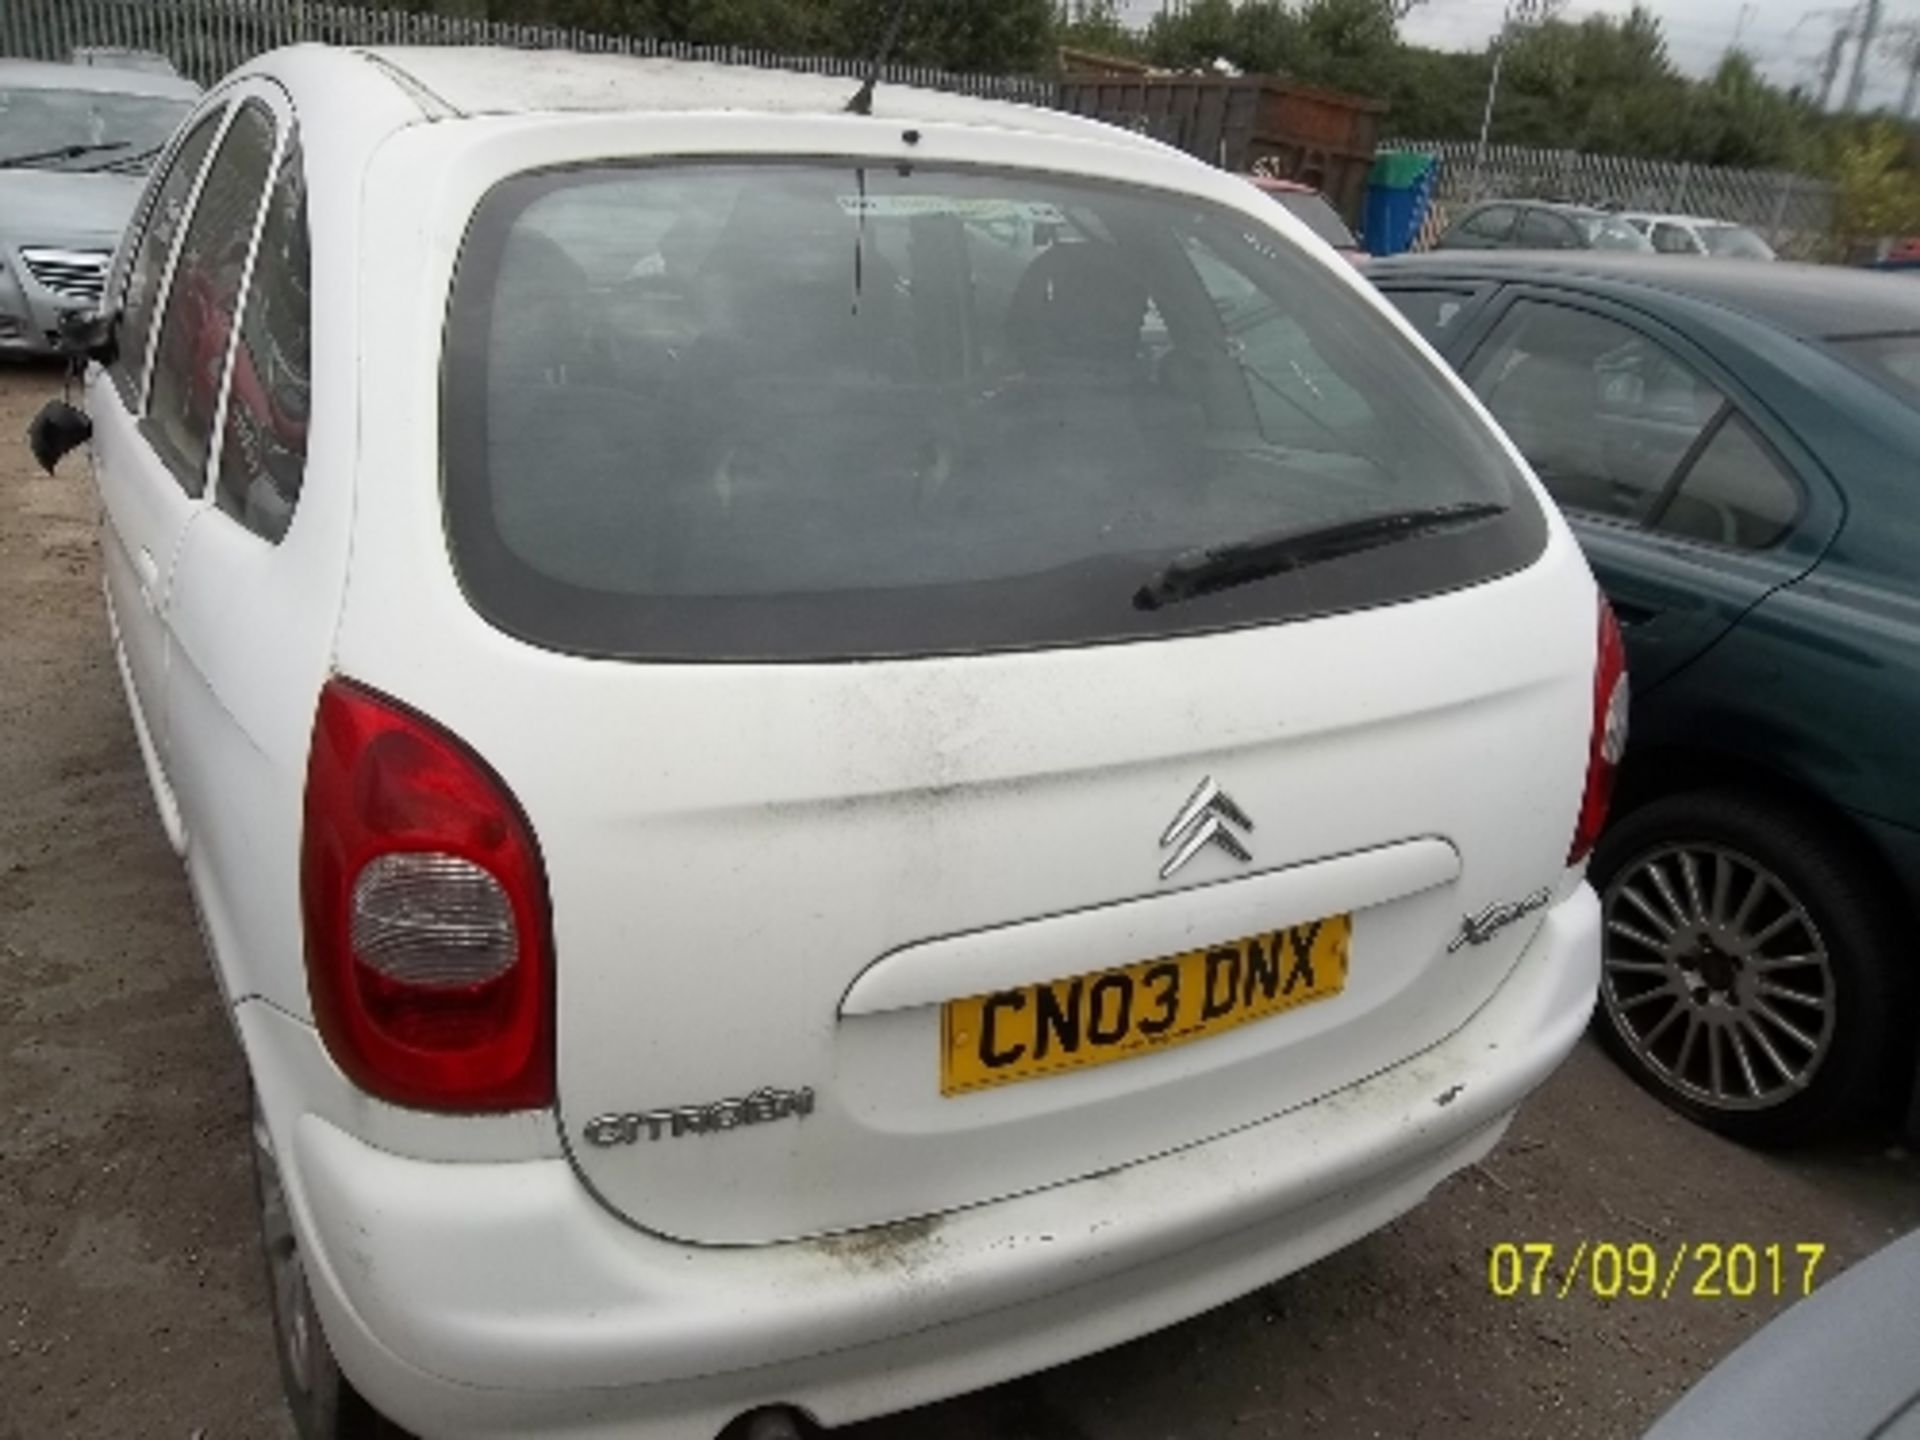 Citroen Saloon - CN03 DNX Date of registration: 01.03.2003 1587cc, petrol, white Odometer reading at - Image 3 of 4